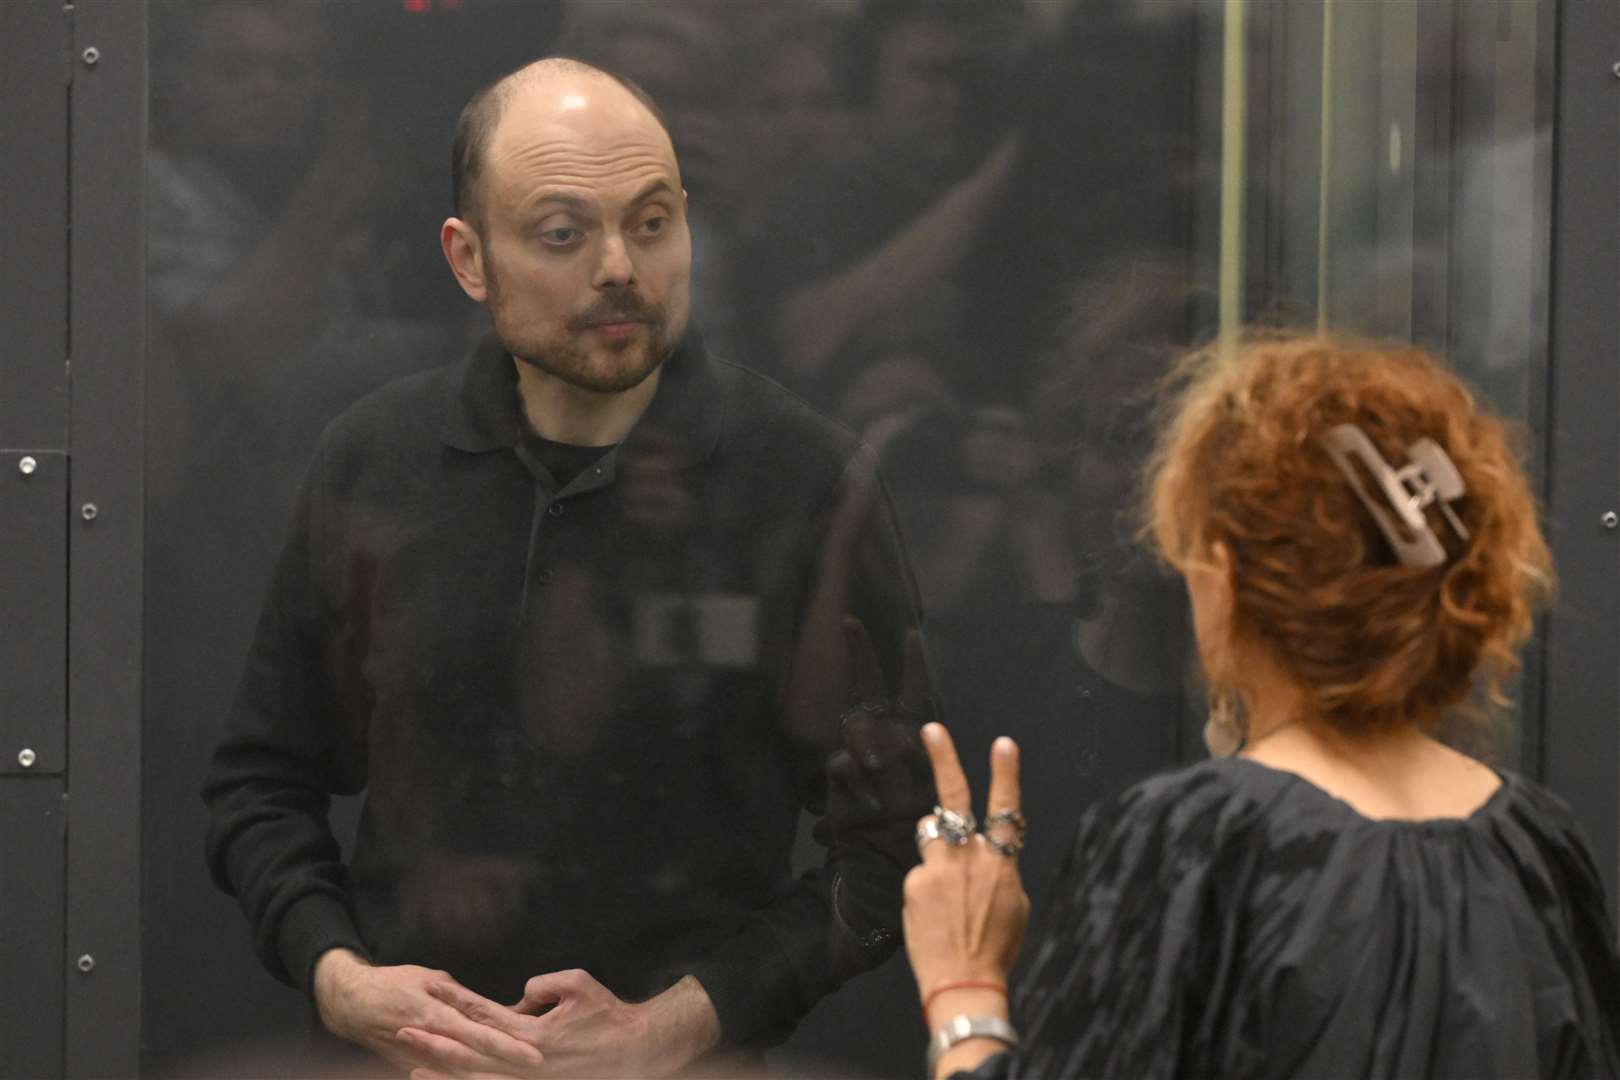 Vladimir Kara-Murza speaks to his lawyer while standing in a glass cage in a courtroom in Moscow (Dmitry Serebryakov/AP)